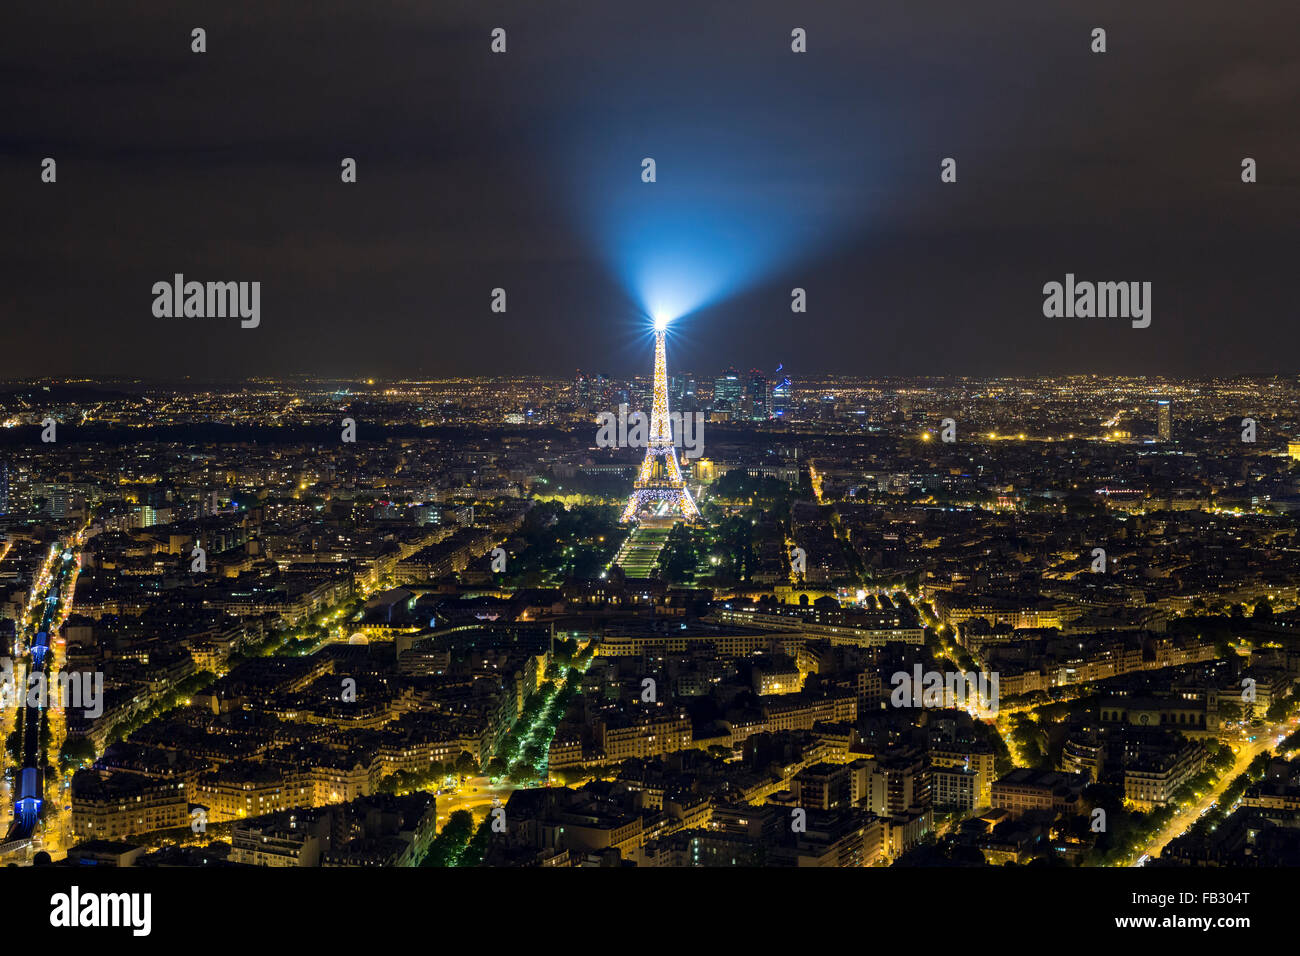 Elevated view of the illuminated Eiffel Tower, night city skyline and distant La Defence skyscraper, Paris, France, Europe Stock Photo